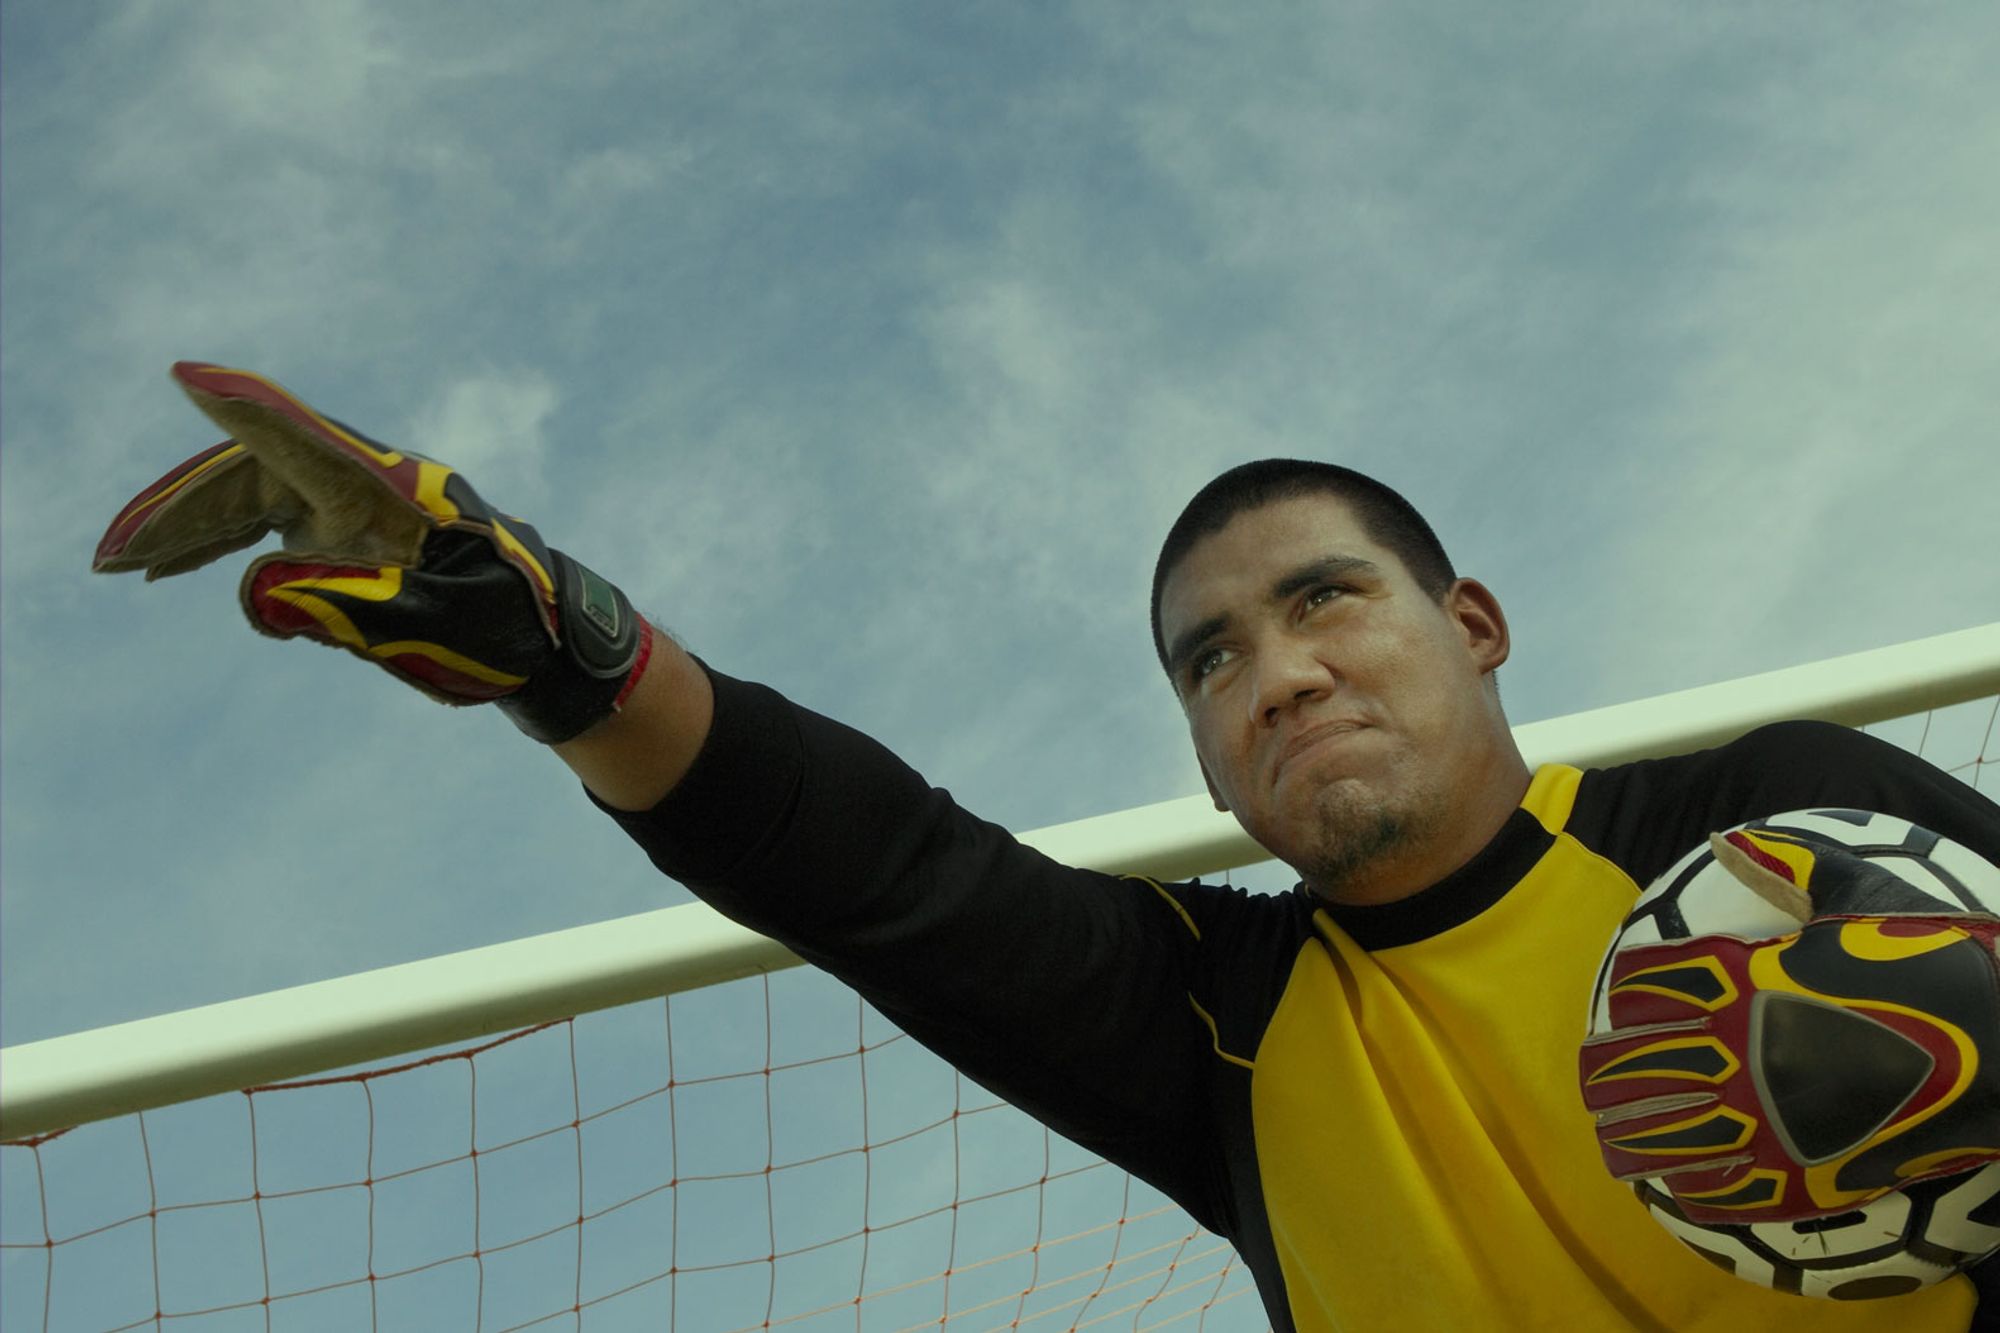 In-match communication: the essential strategy for successful goalkeeping